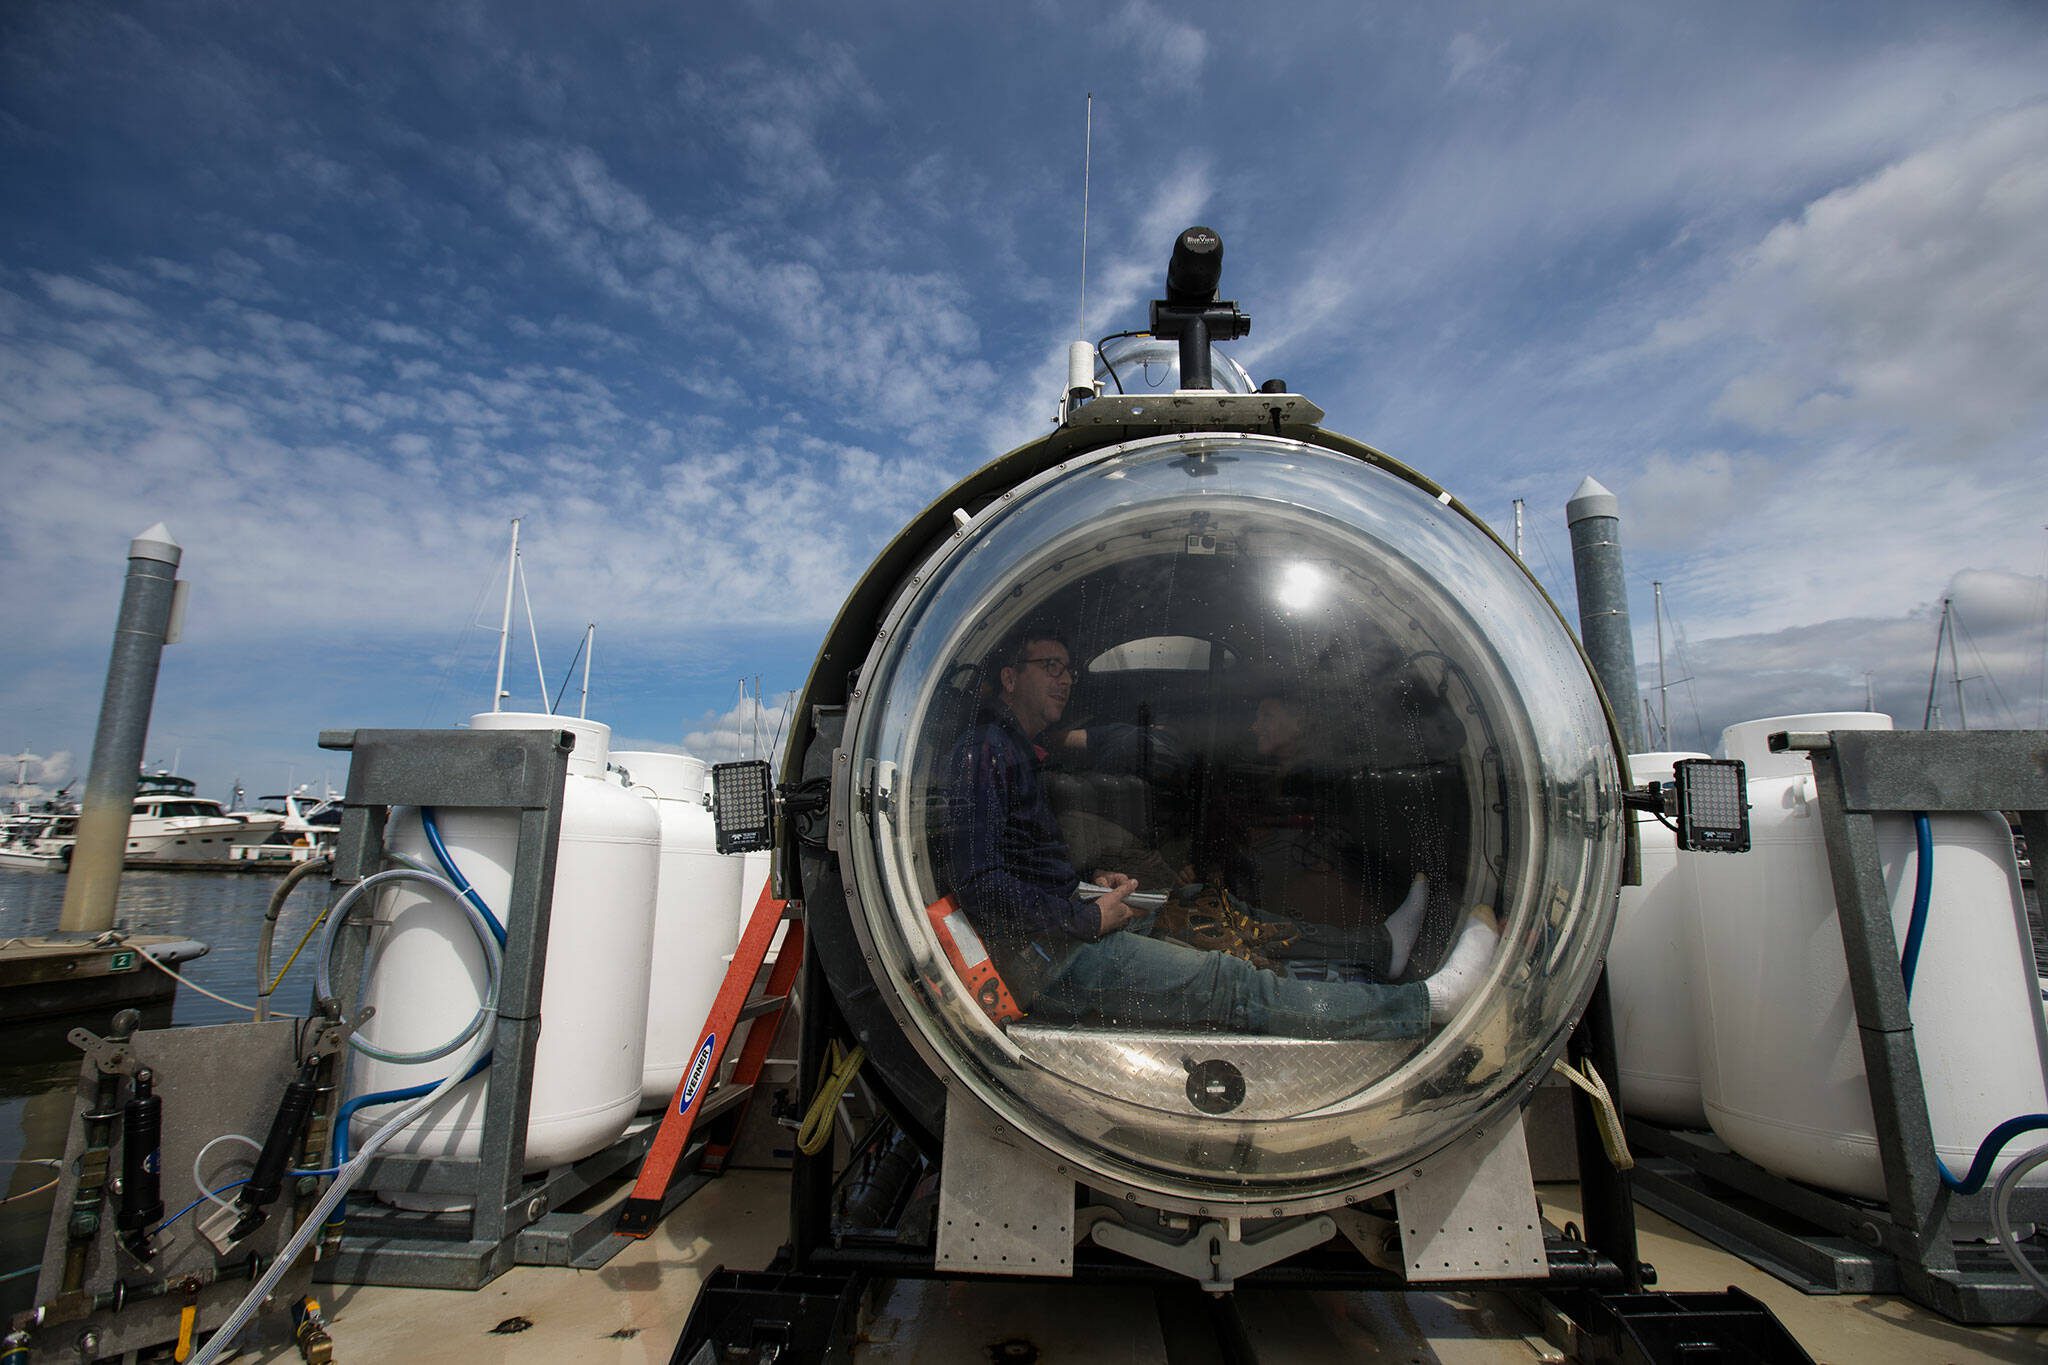 Waiting to dive below the surface, Josh Dean looks out the front dome of the OceanGate sub Cyclops1 in the Port of Everett Marina on Thursday, May 18, 2017 in Everett, Washington. (Andy Bronson / The Herald)